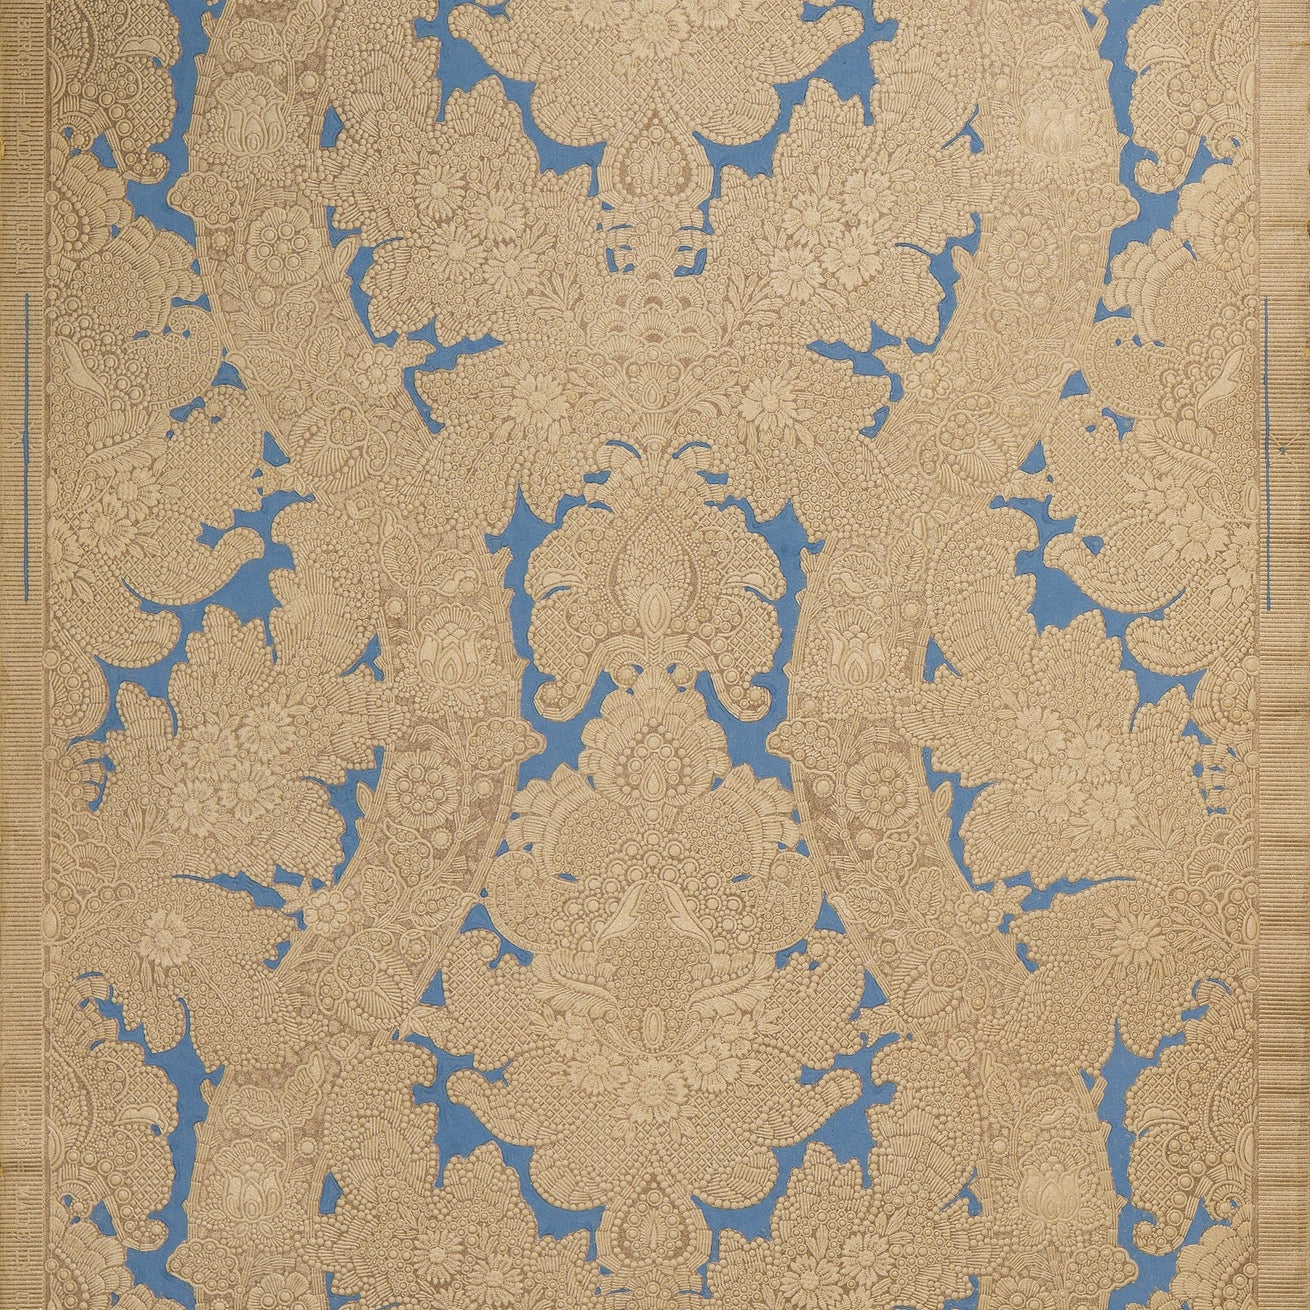 Intricately Tooled Embossed Damask - Antique Wallpaper Remnant